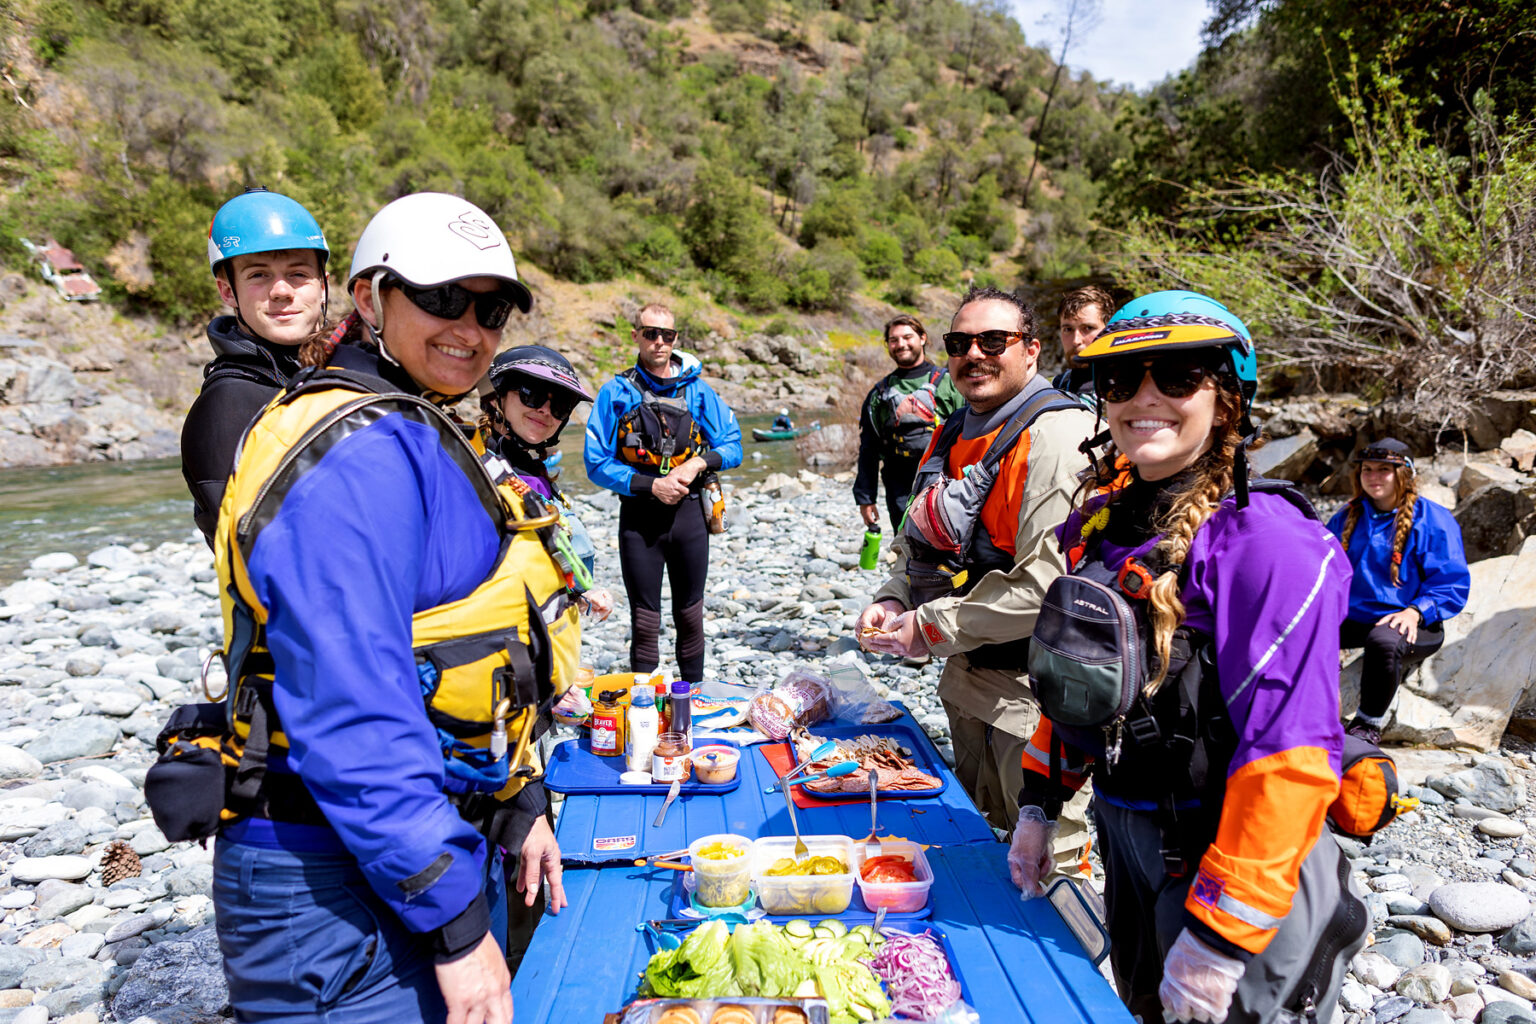 Getting lunch ready on the North Fork of the American River during an OARS rafting trip